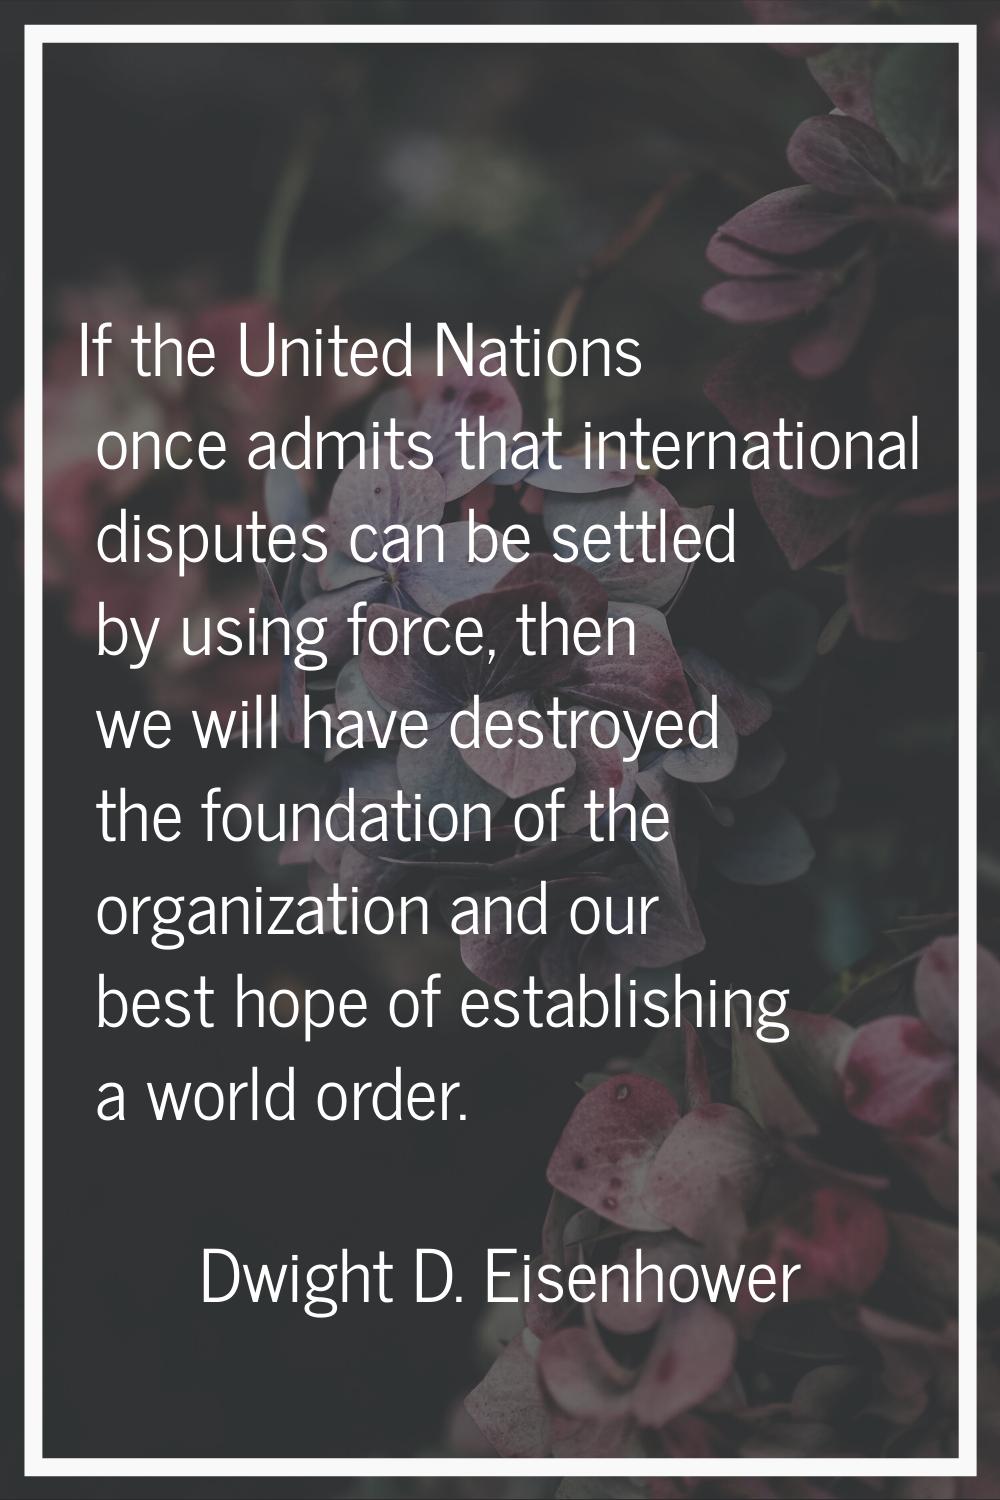 If the United Nations once admits that international disputes can be settled by using force, then w